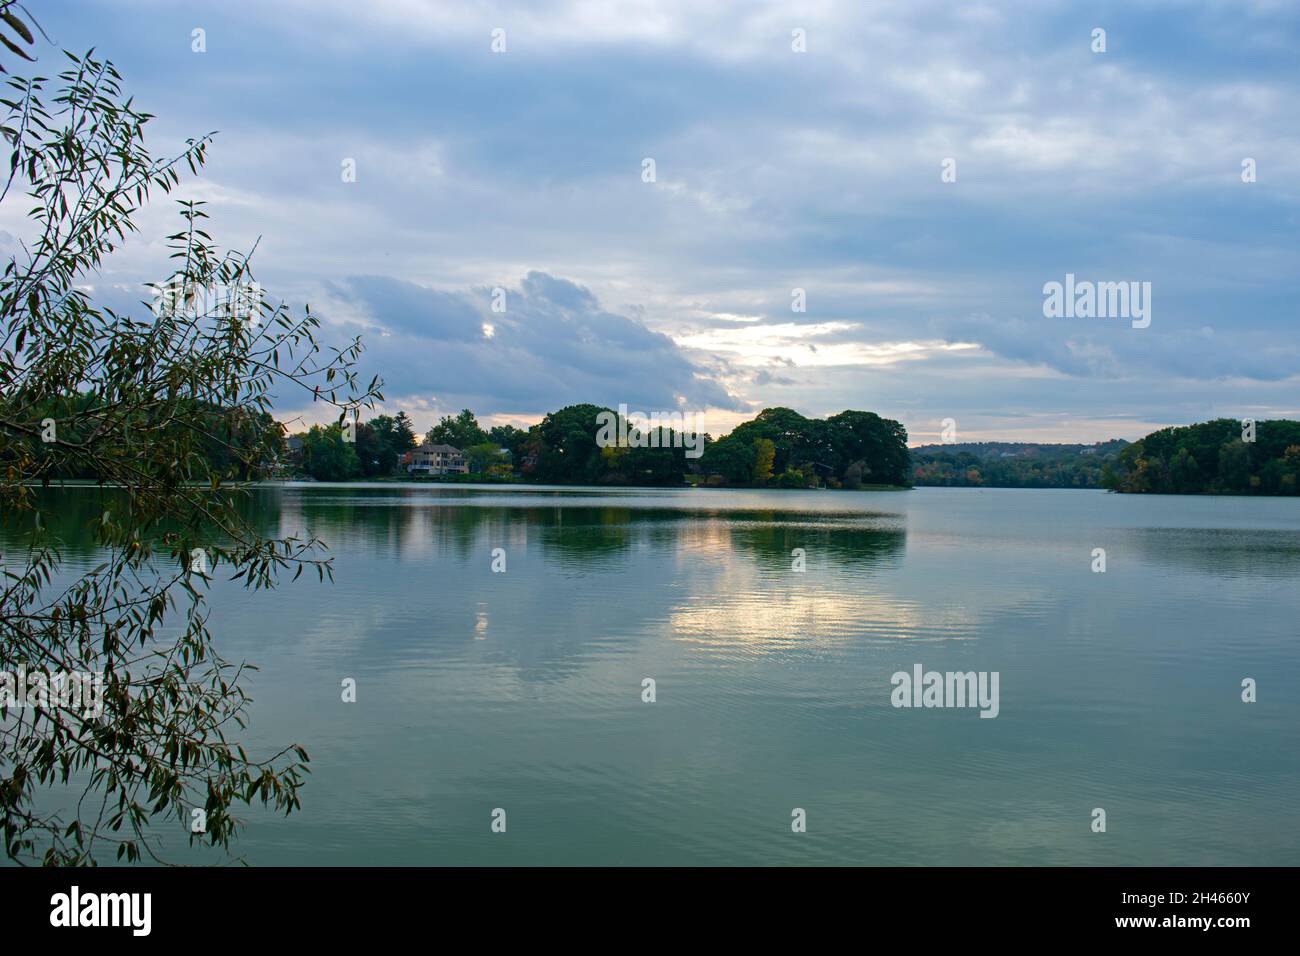 Clouds and trees reflecting on the still waters of Spy Pond, in Arlington, Massachusetts, on a cloudy autumn day -02 Stock Photo